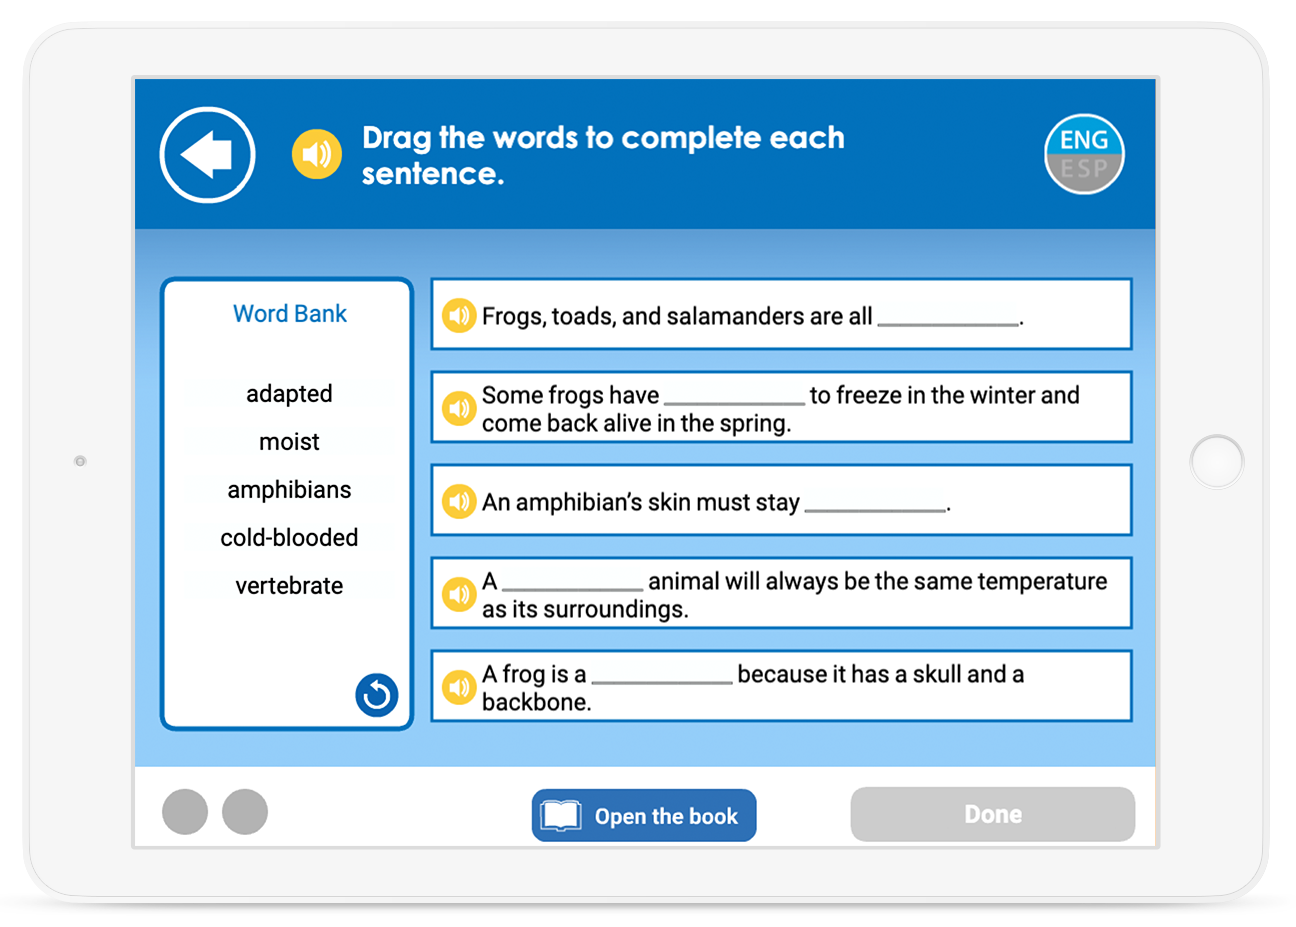 Use domain-specific and tier 2 vocabulary words in sentences, using the book glossary for support.